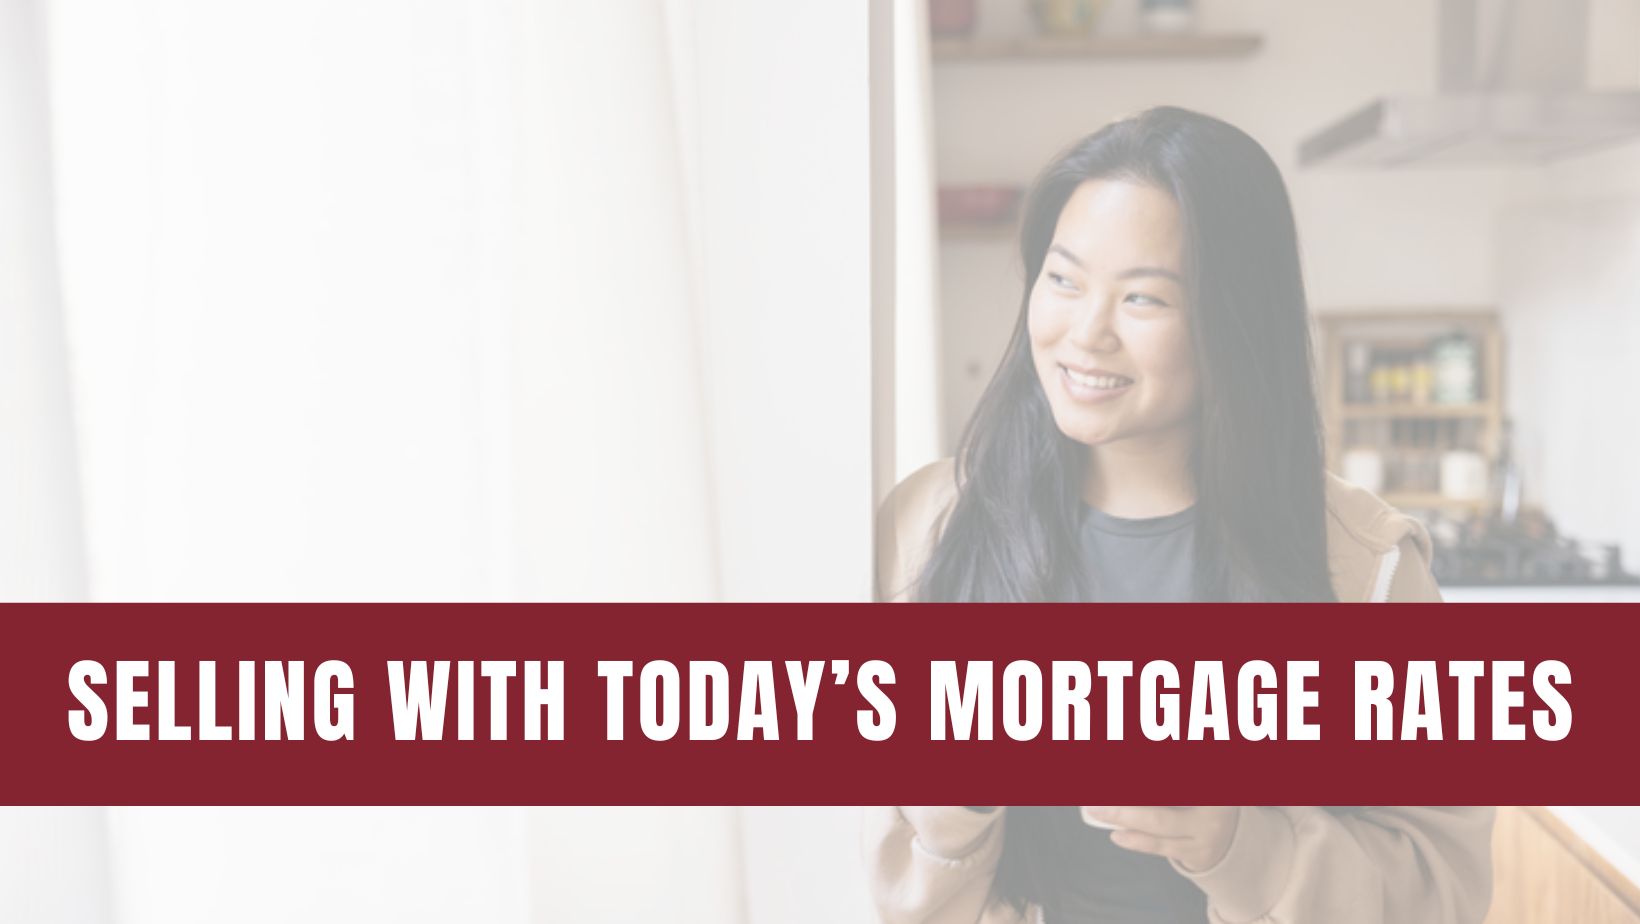 2 Reasons Why Today’s Mortgage Rate Trend Is Good for Sellers